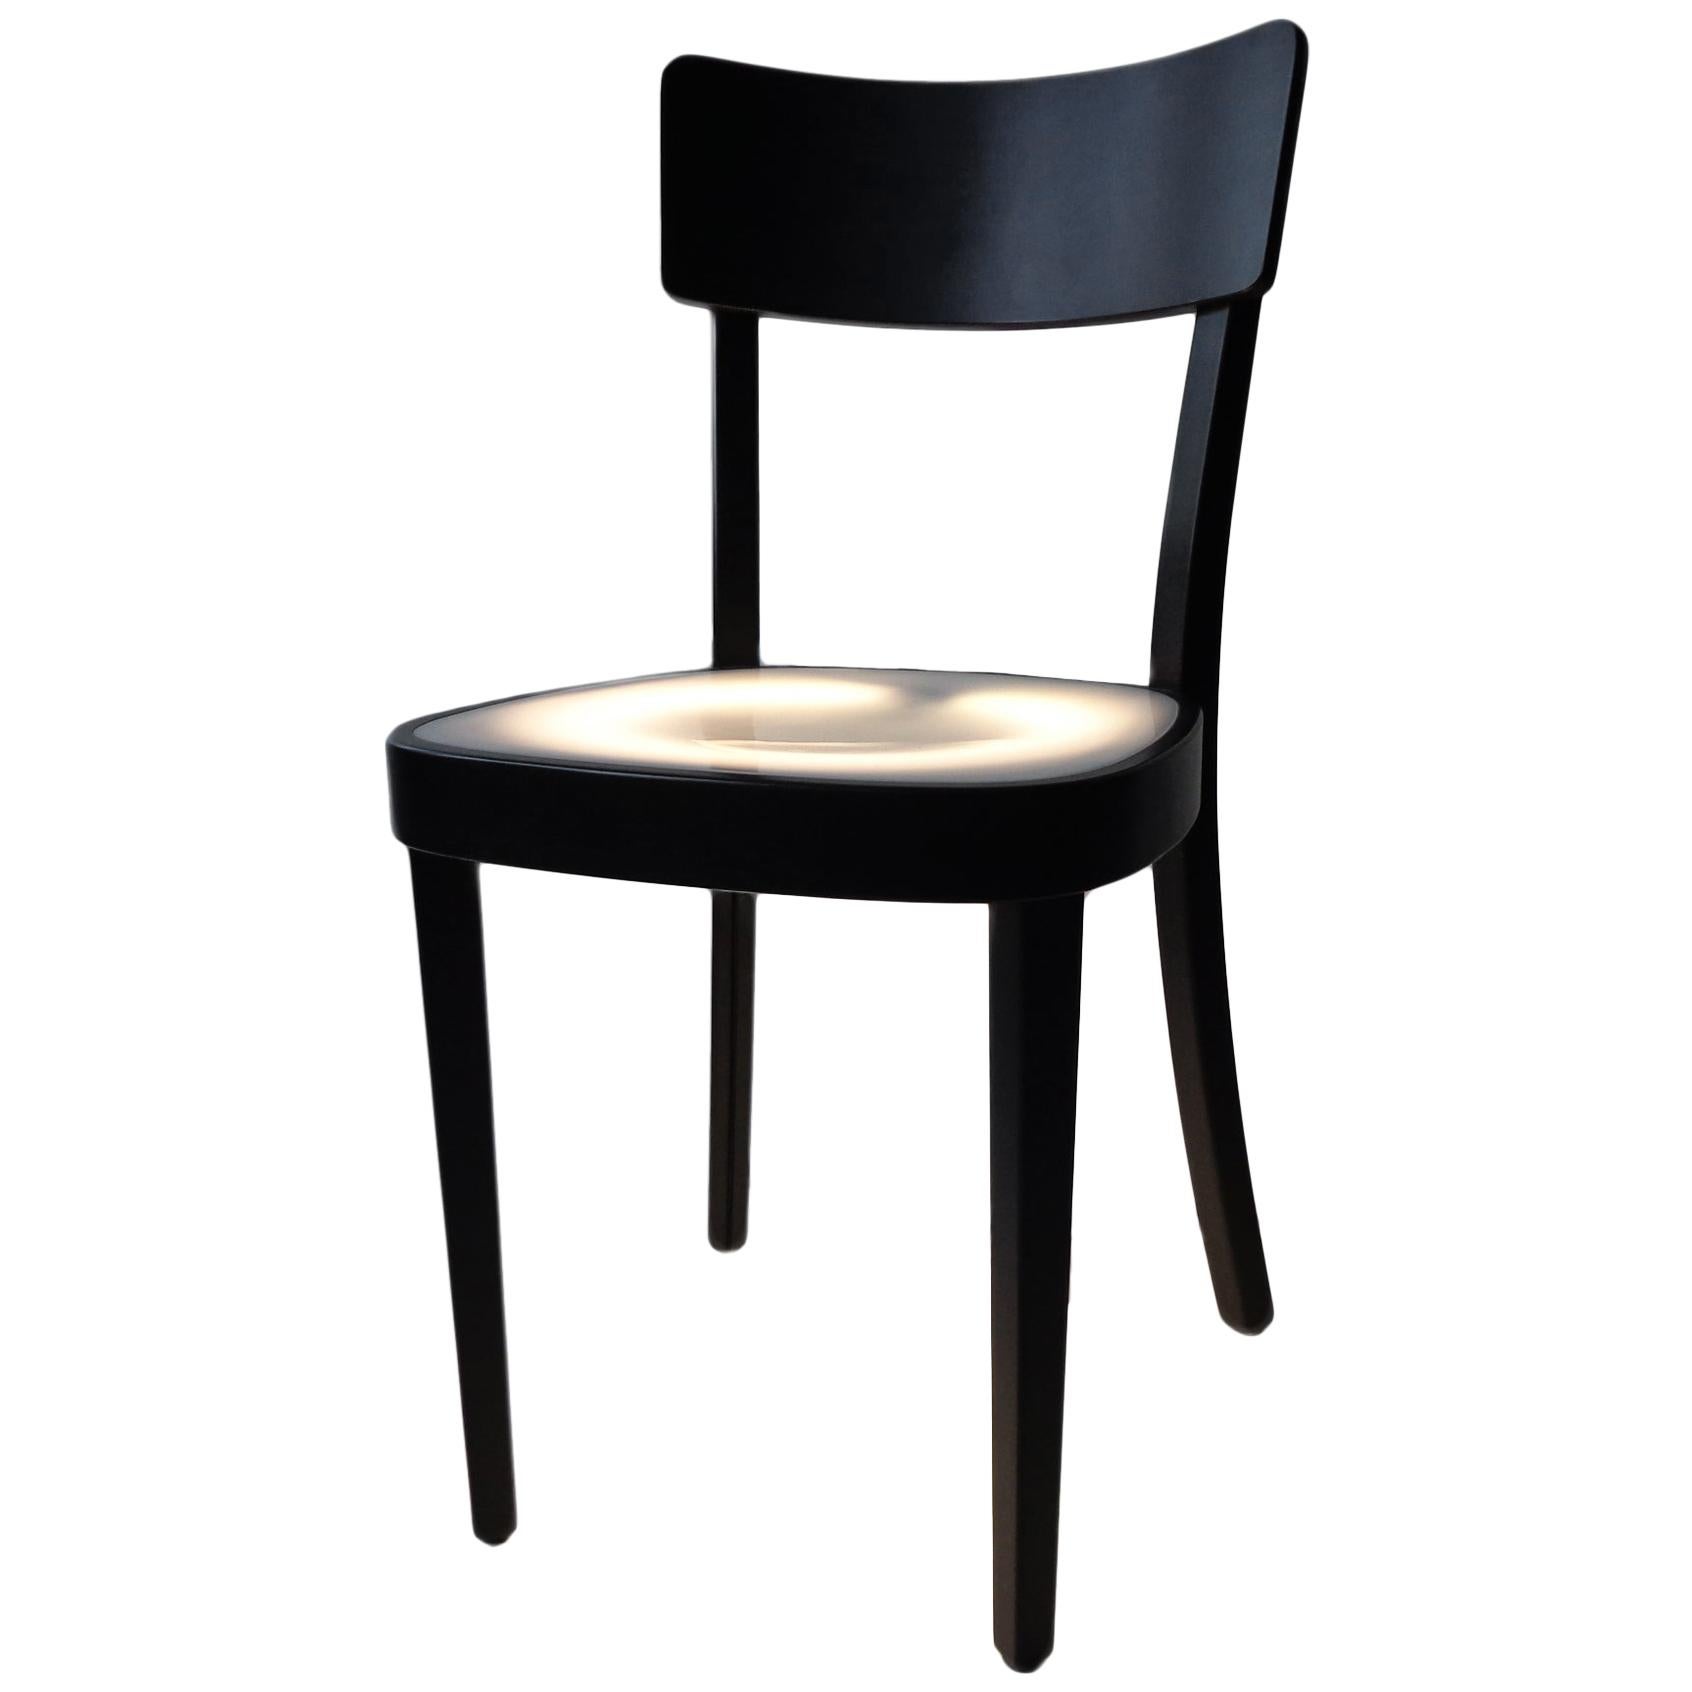 Neon Light Chair in Black-Lacquered Wood from Horgen Glarus for Hidden, 2000s For Sale